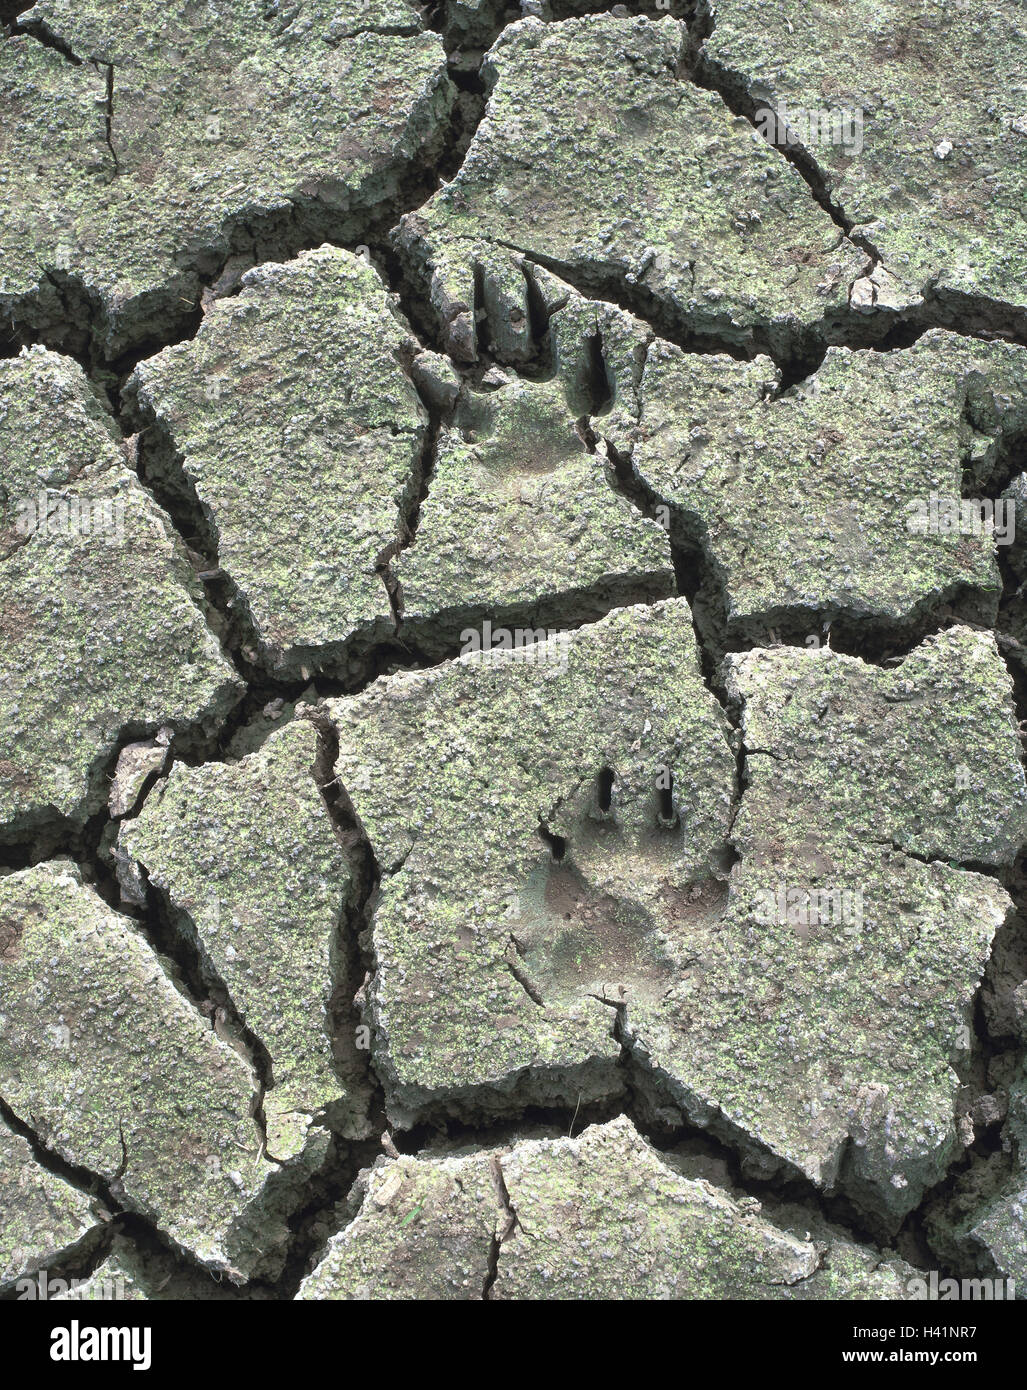 Ground, cracked, dryness, dryness, water shortage, animal tracks, floor, fissures, heat fissures, parched, dried up, life-hostilely, drily, conception, survival fight, thirst, dry weather, heat period, nature, animals, tracks, impressions, paw impressions Stock Photo